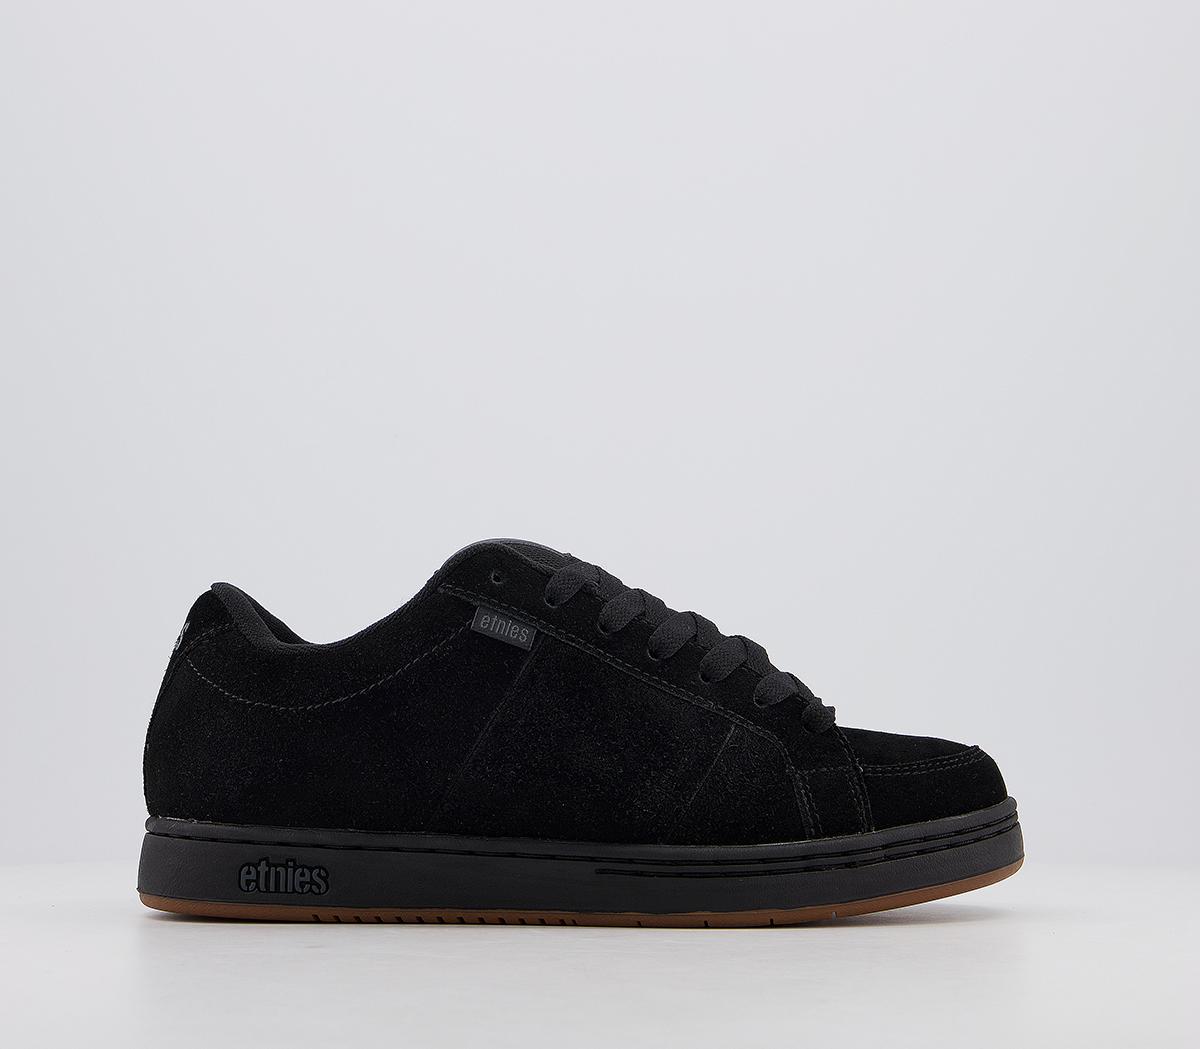 Etnies Kingpin Trainers Black Charcoal Gum - His trainers